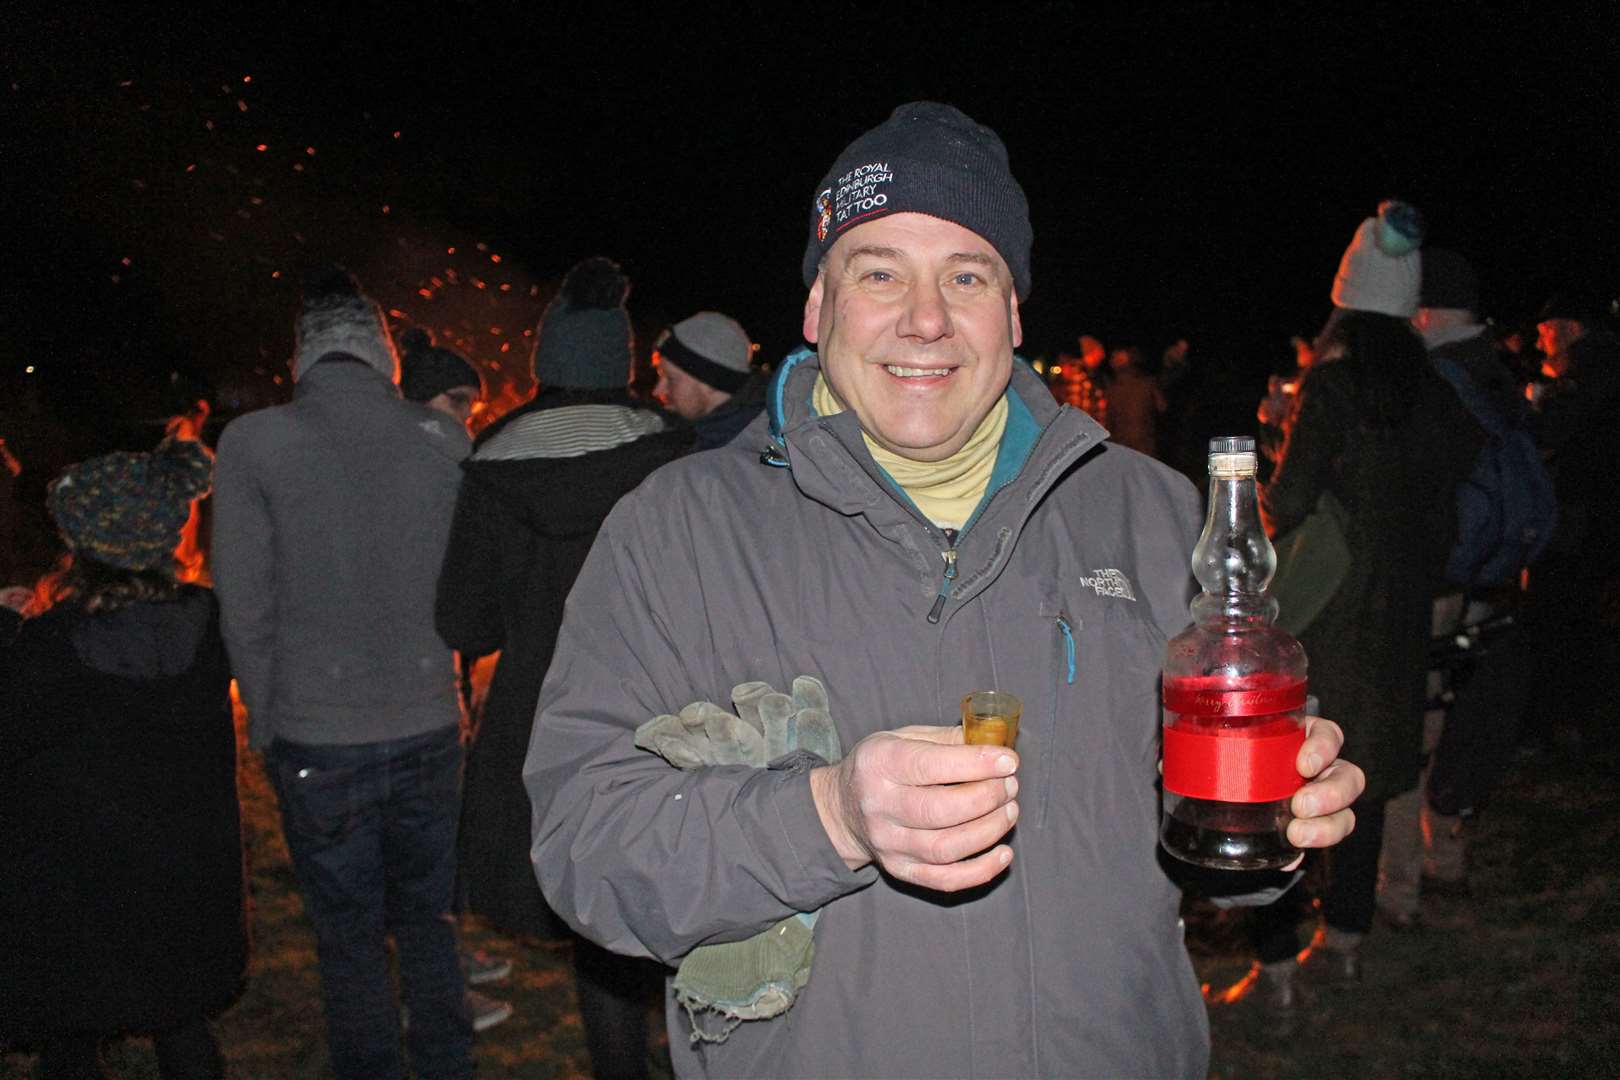 Organiser Mervyn Hill offering non-alcoholic ginger wine at last year's Hogmanay bonfire. Picture: Alan Hendry